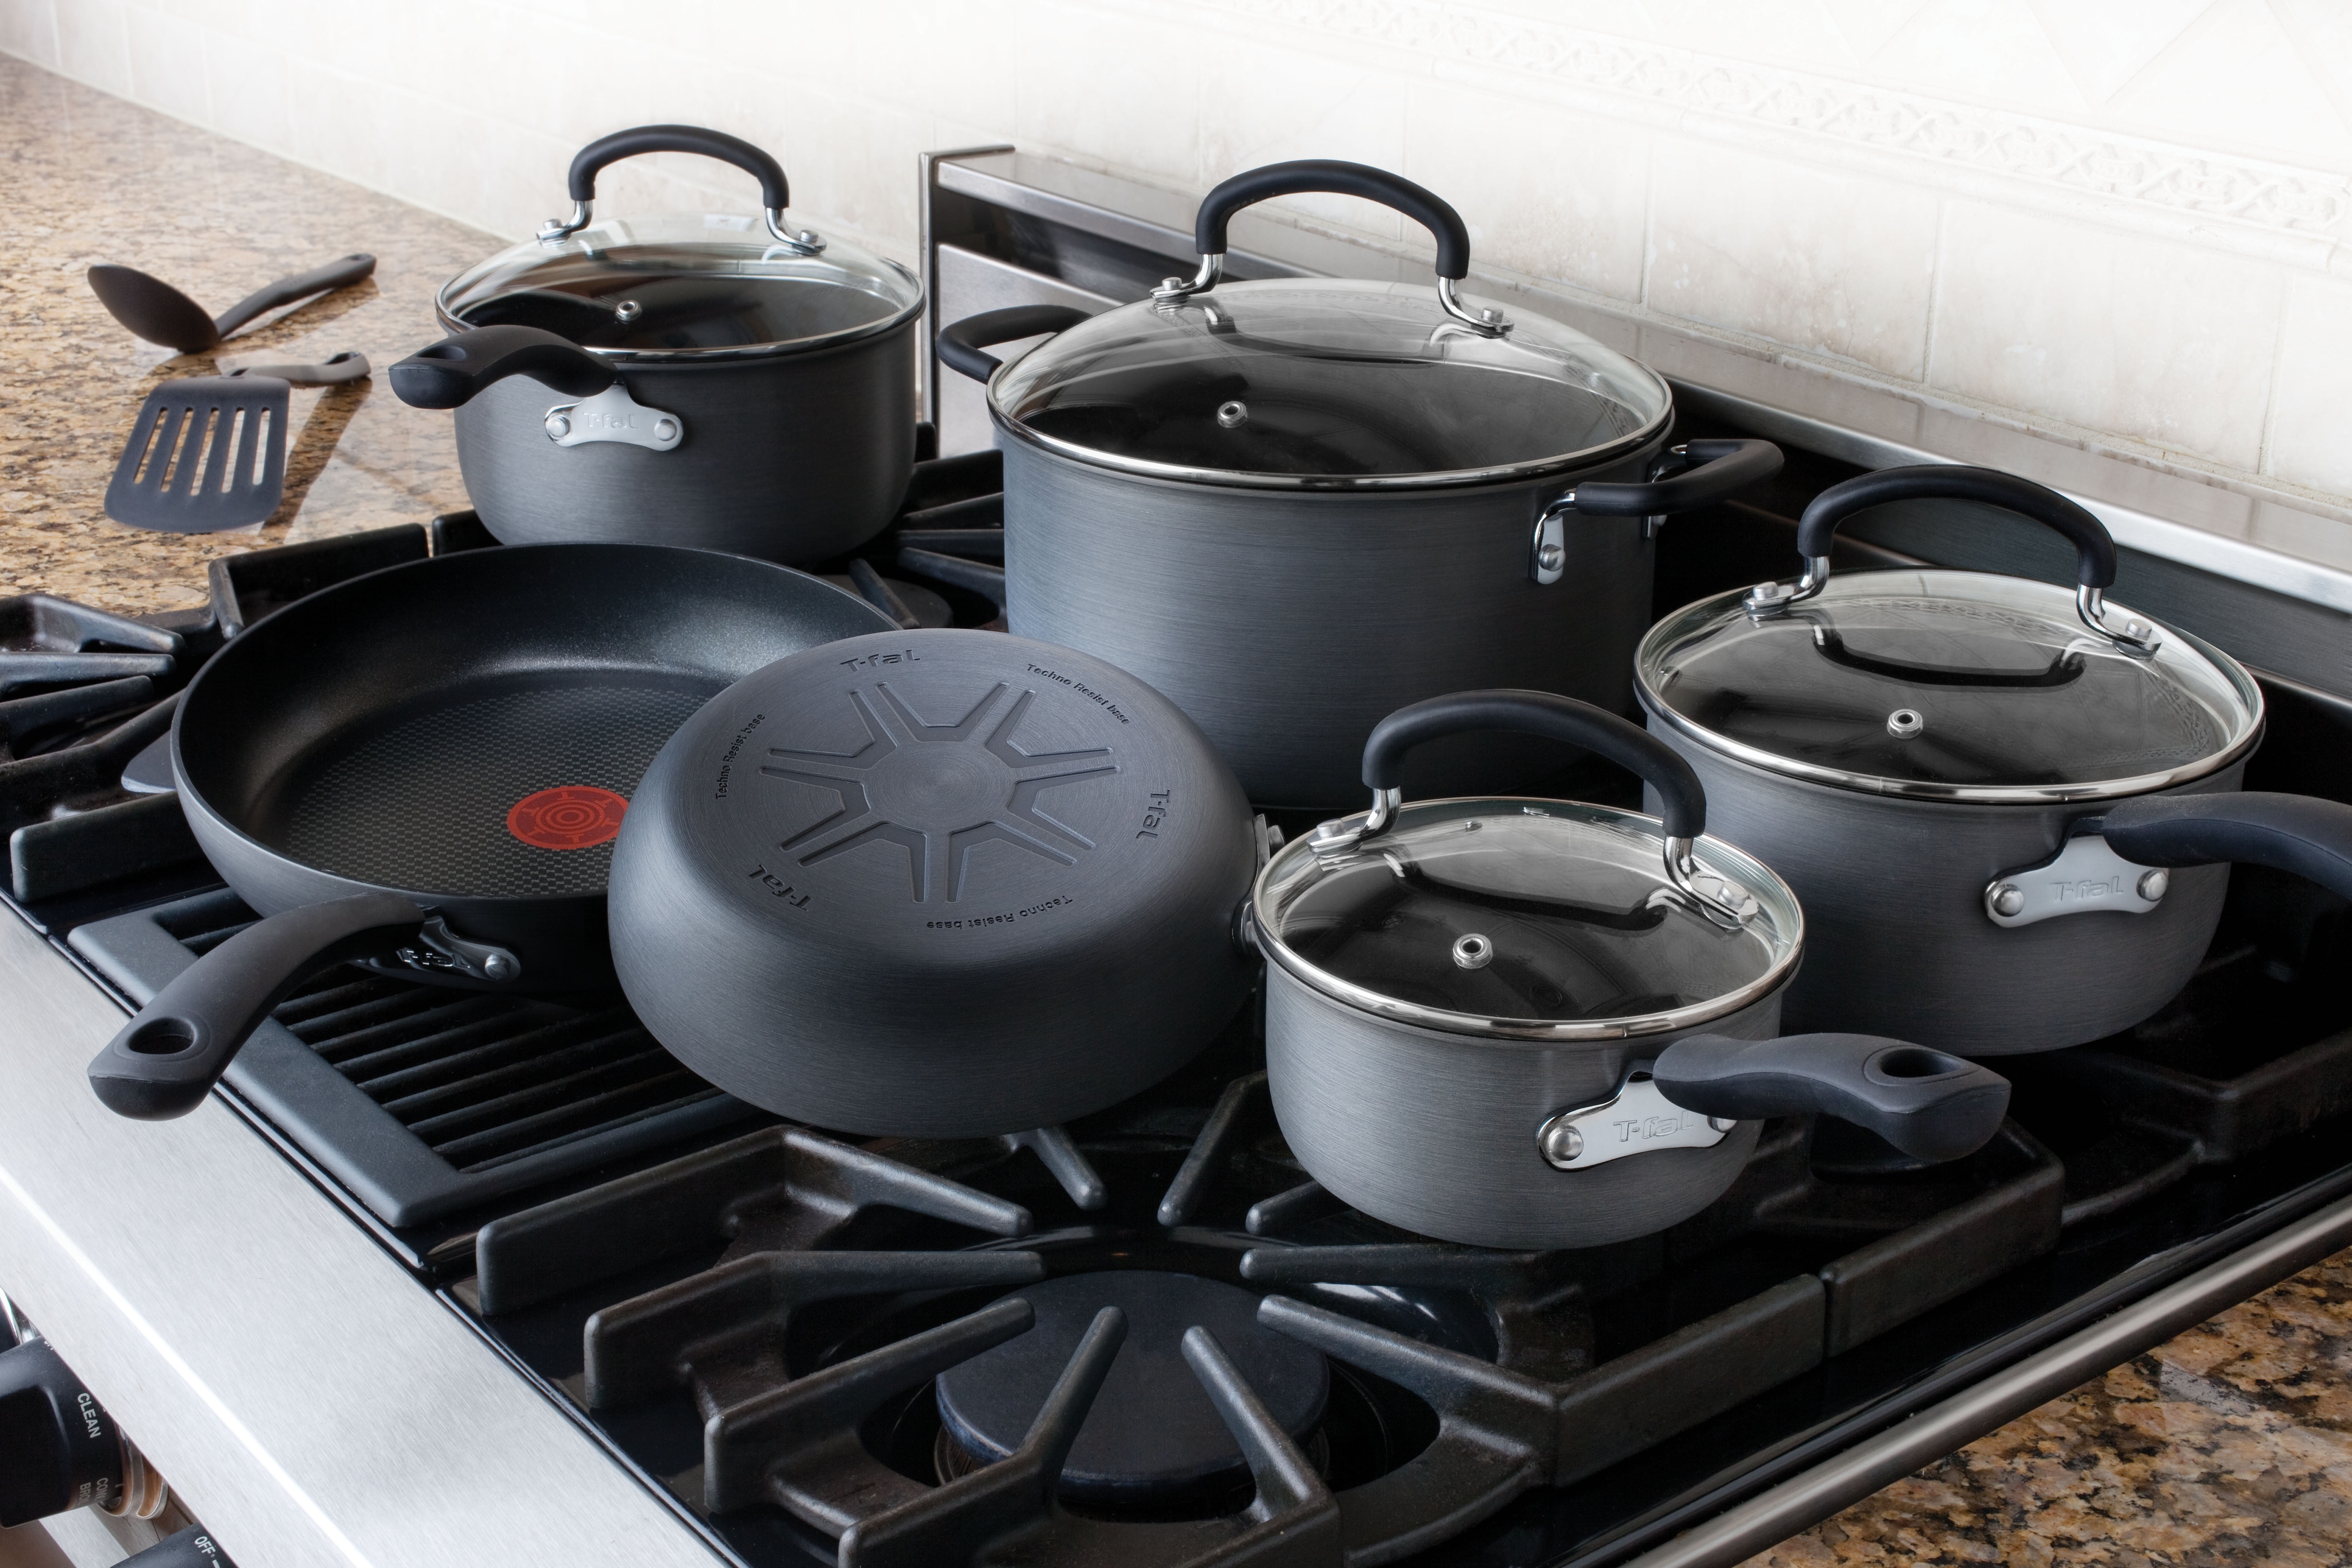 Best Buy: T-Fal Ultimate Hard Anodized Nonstick 12-Piece Cookware